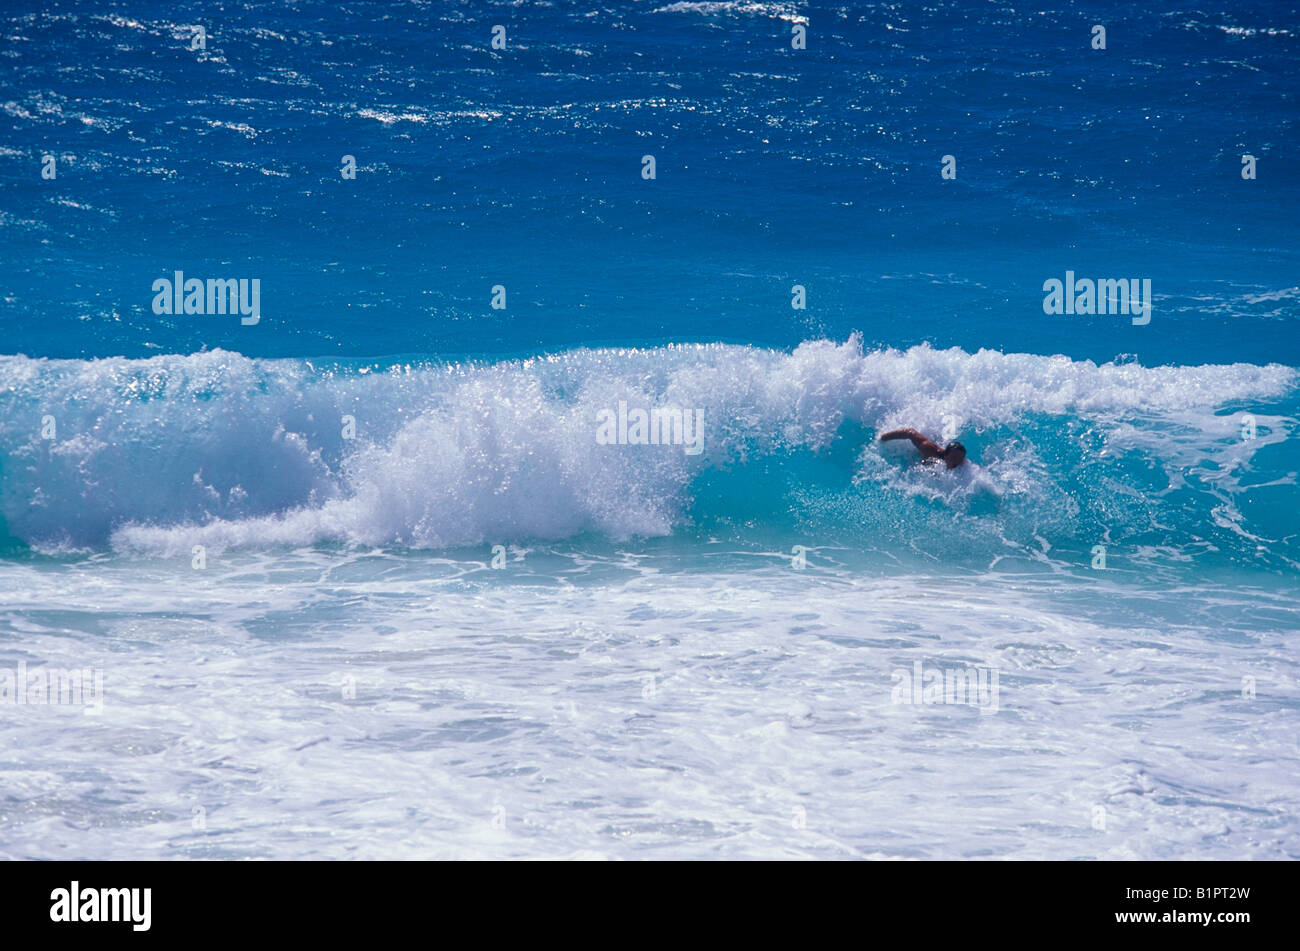 A lone man bodysurfing in the glorious crashing waves of the Atlantic Ocean breaking near shore of Cancun, Quintana Roo, Mexico Stock Photo